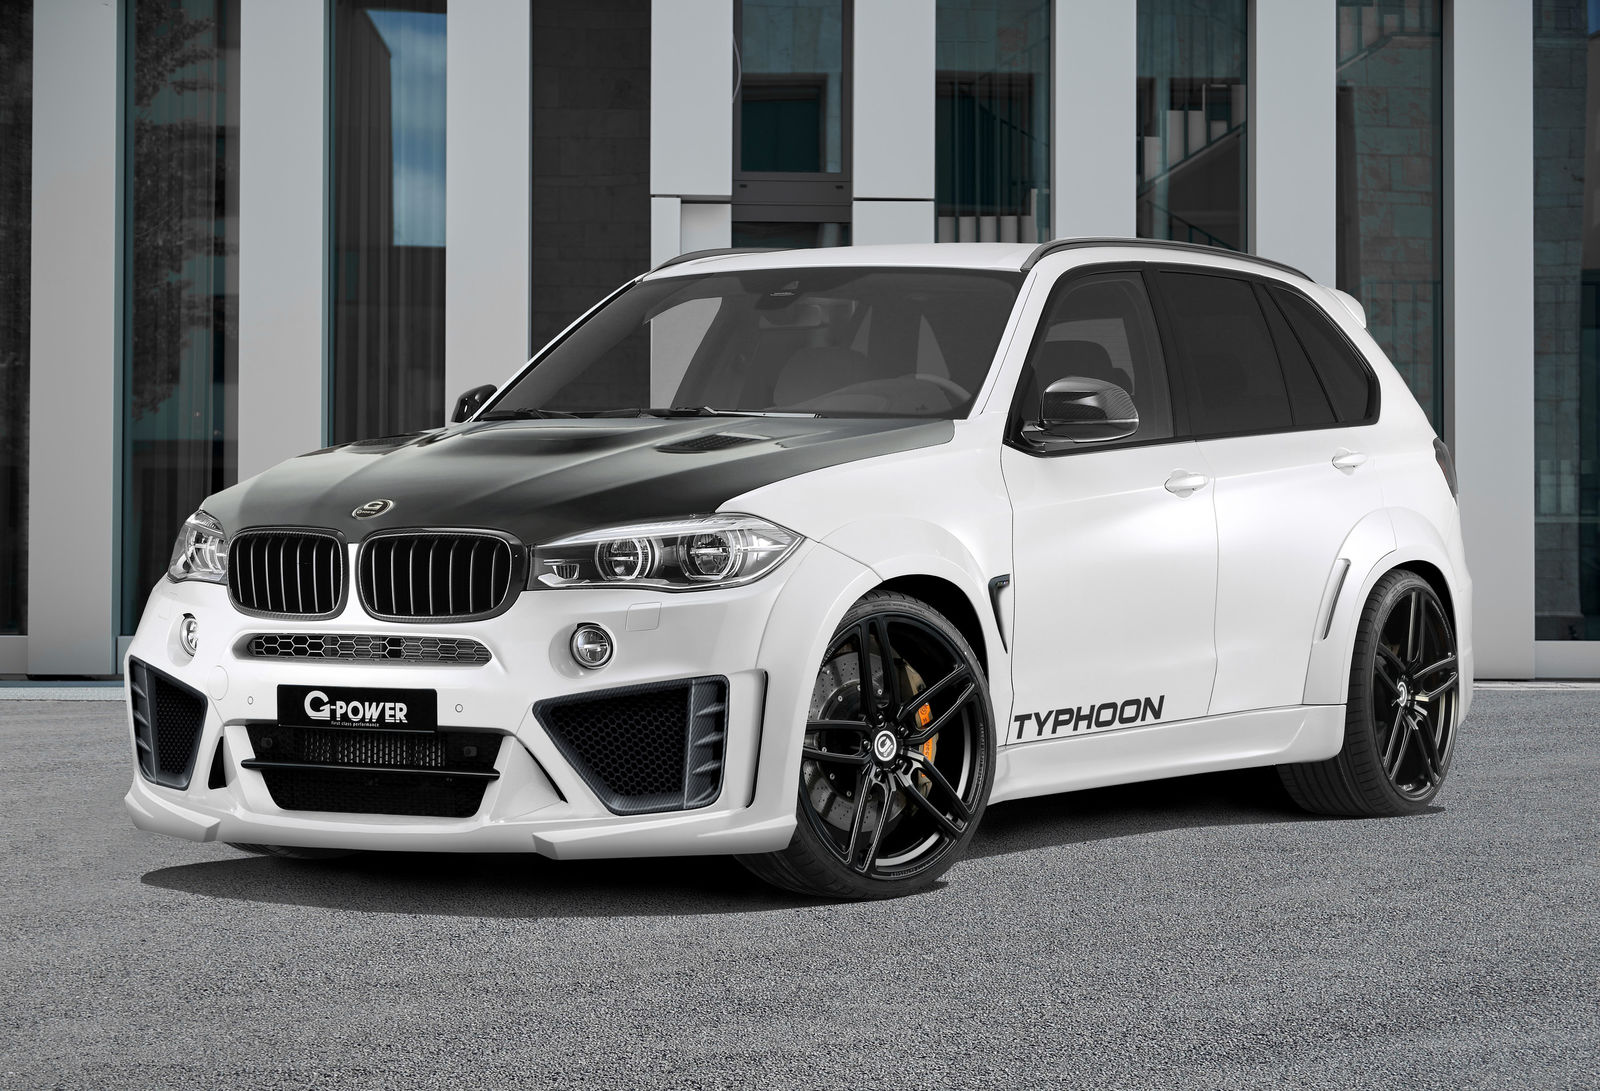 Official: 2016 G-Power BMW X5 M Typhoon with 750hp - GTspirit